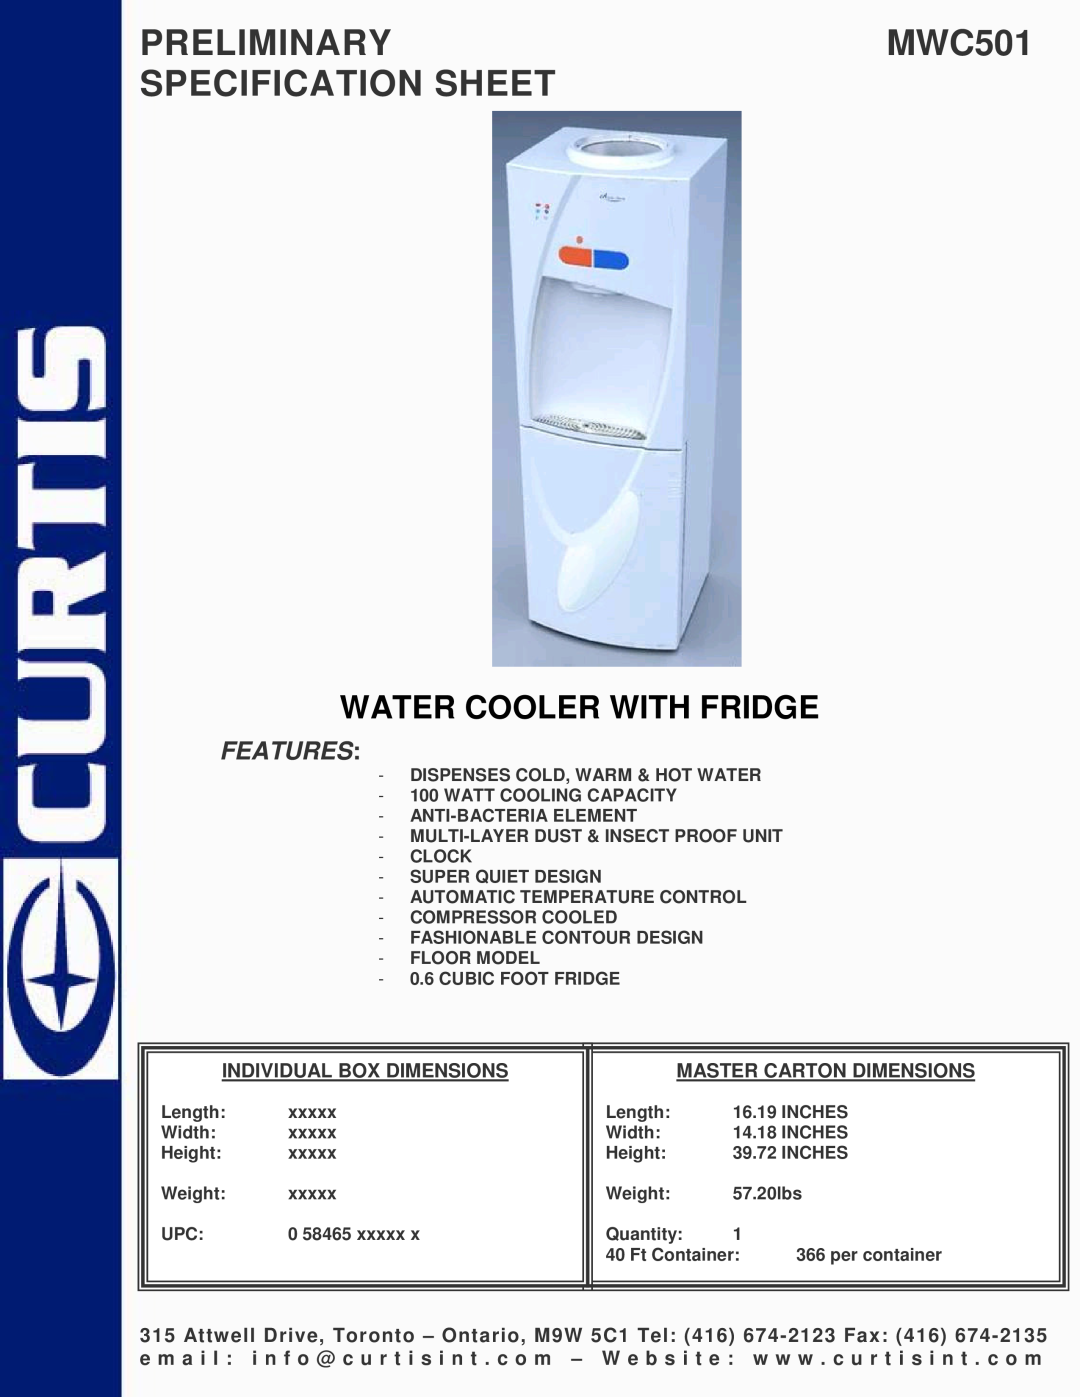 Curtis specifications PRELIMINARYMWC501 SPECIFICATION SHEET, Water Cooler With Fridge, Features 